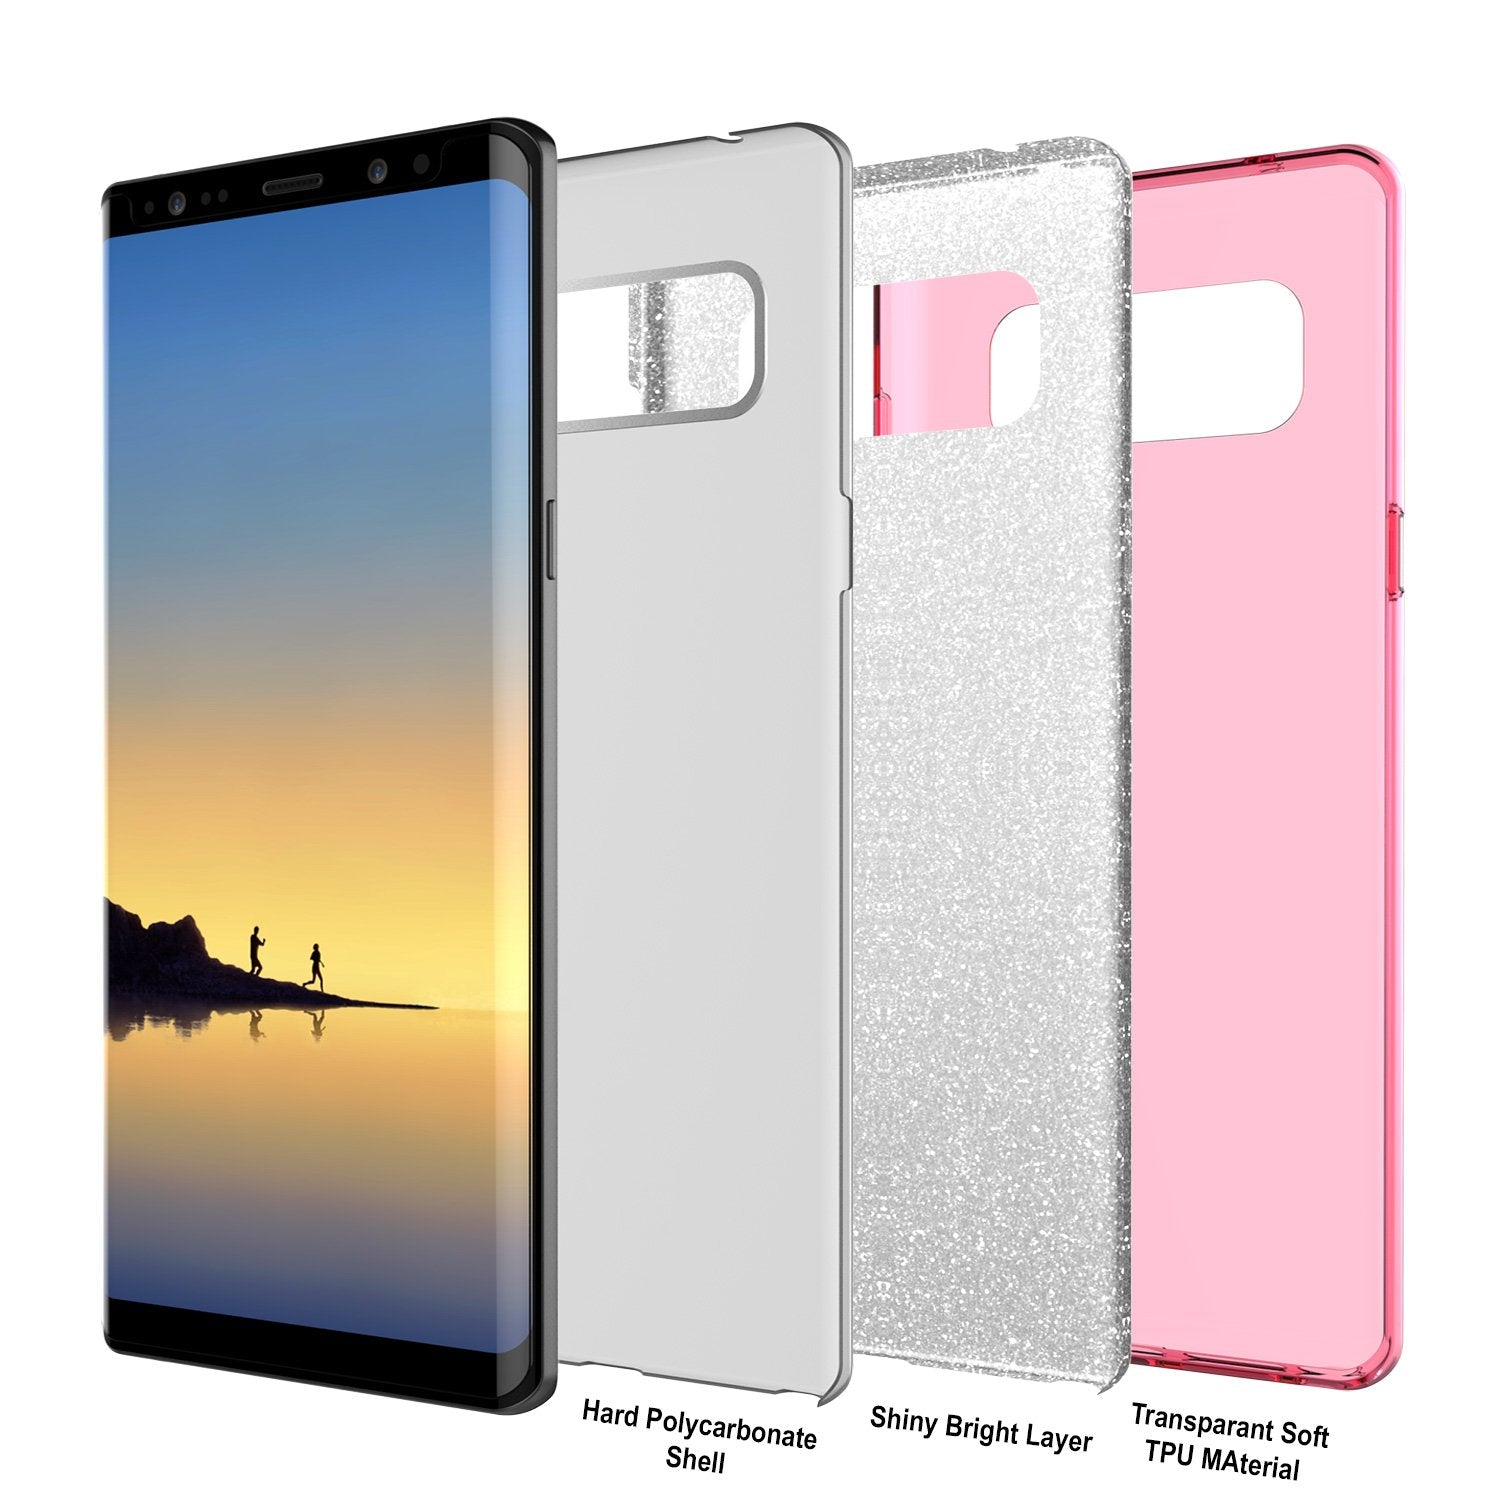 Galaxy Note 8 Case, Punkcase Galactic 2.0 Series Ultra Slim Protective Armor [Pink]